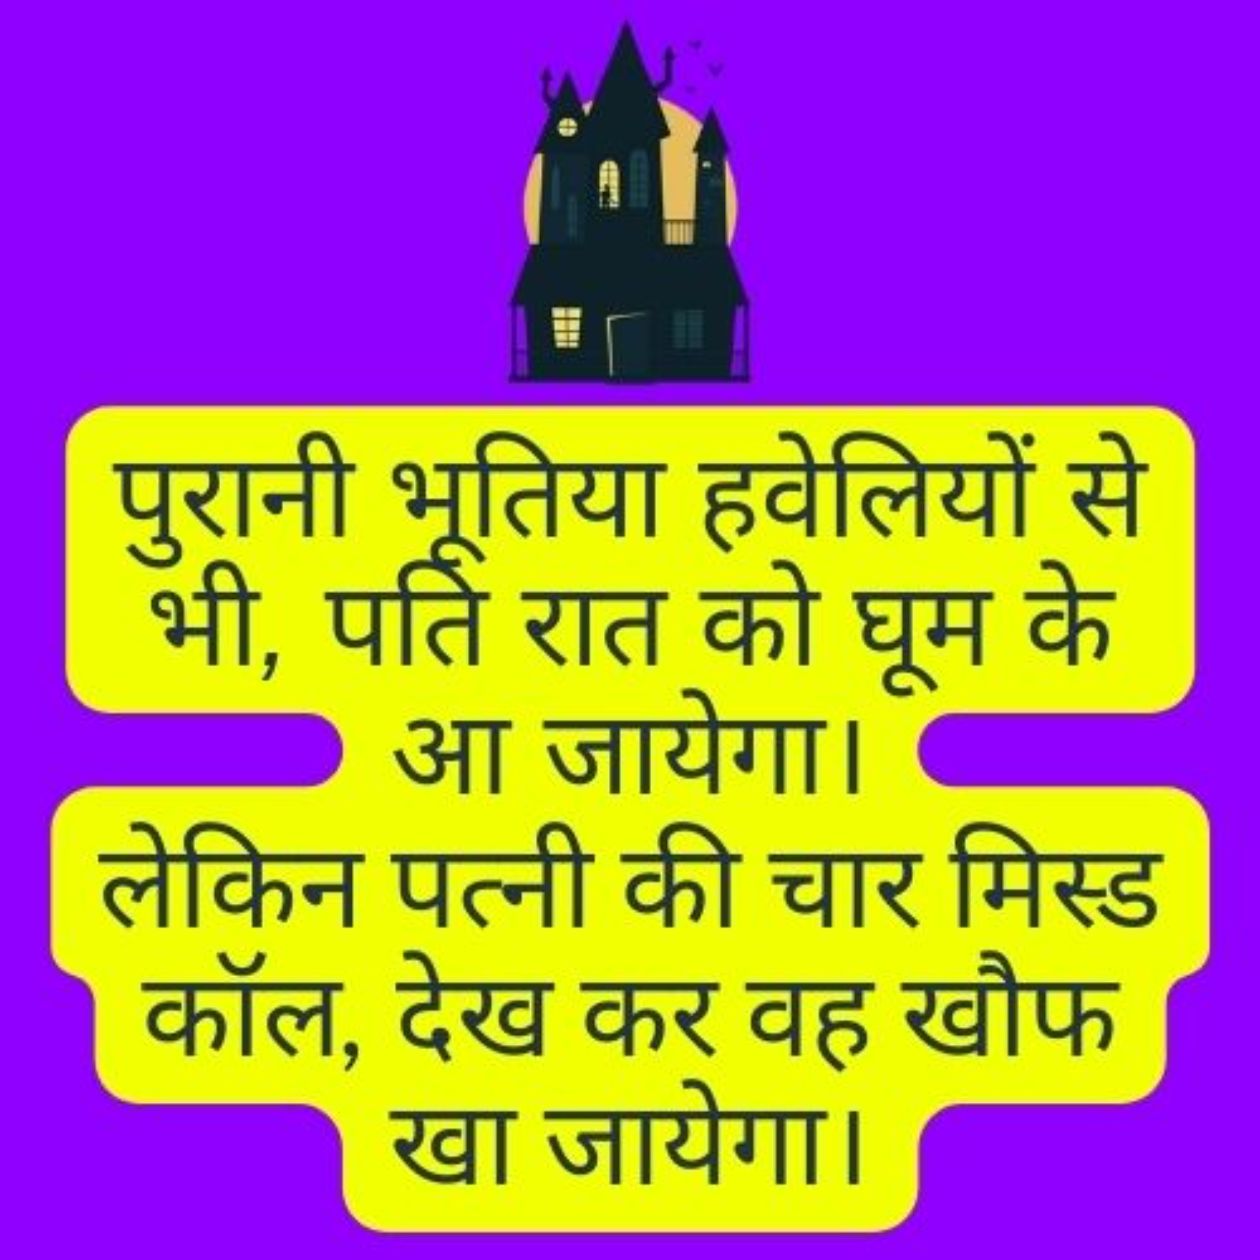 A Haunted House animation and funny text in Hindi about the bravery of a husband. 